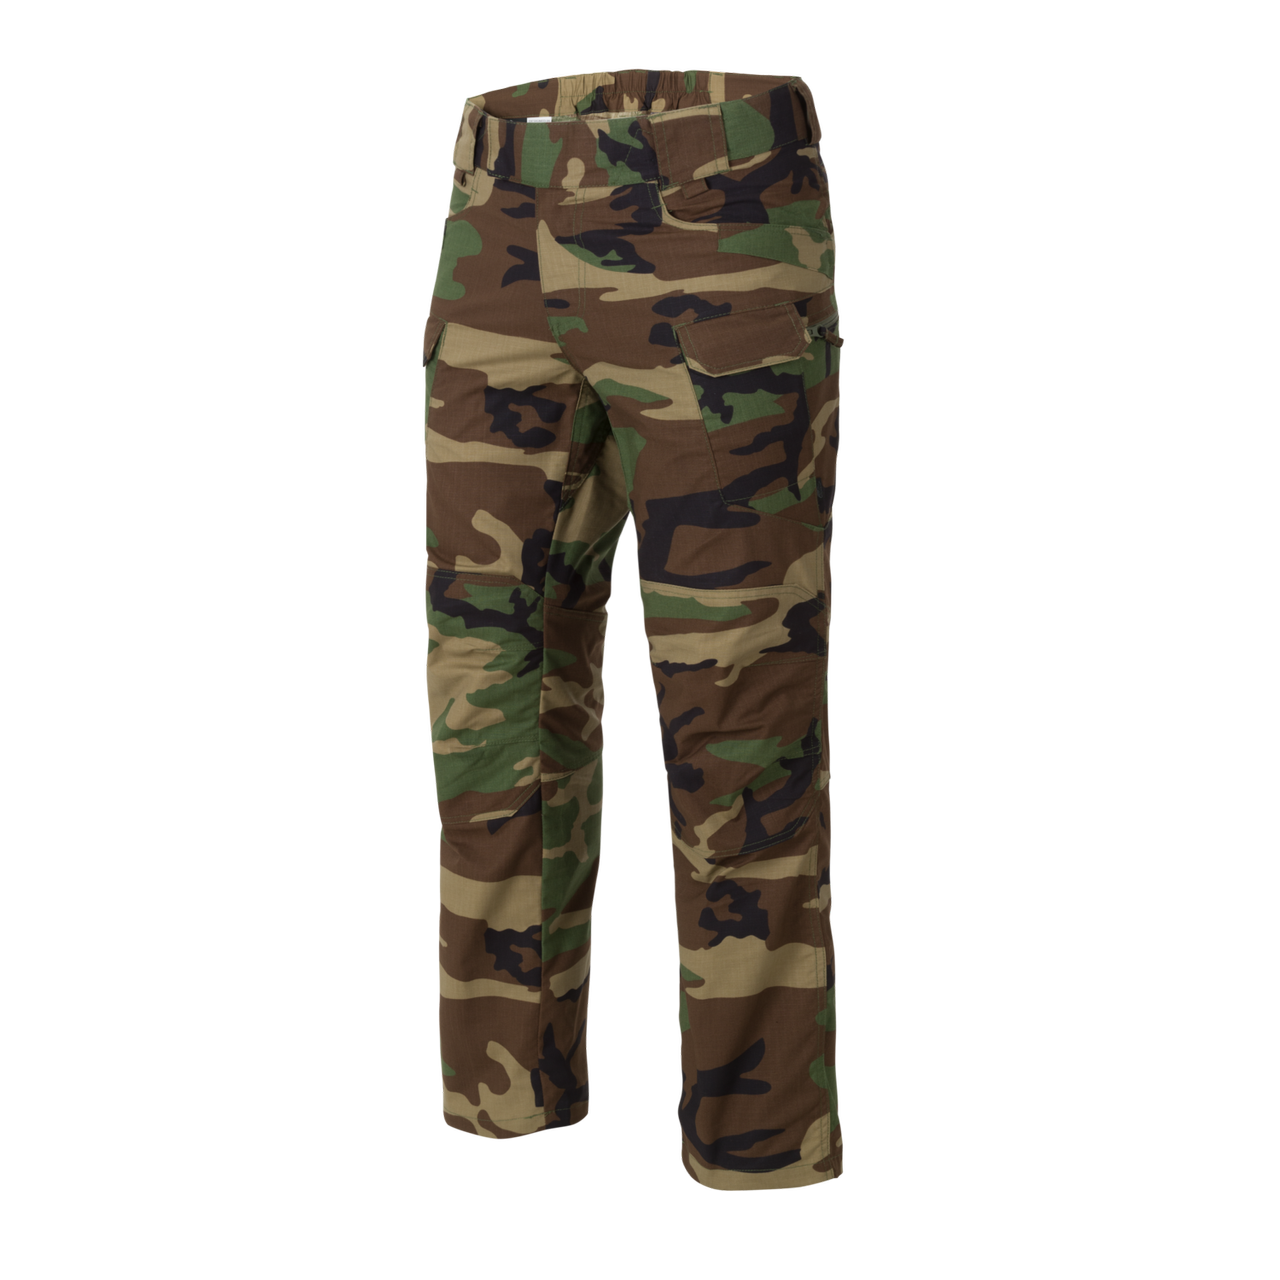  Army Navy Surplus - Tactical, Big variety -  Cheap prices